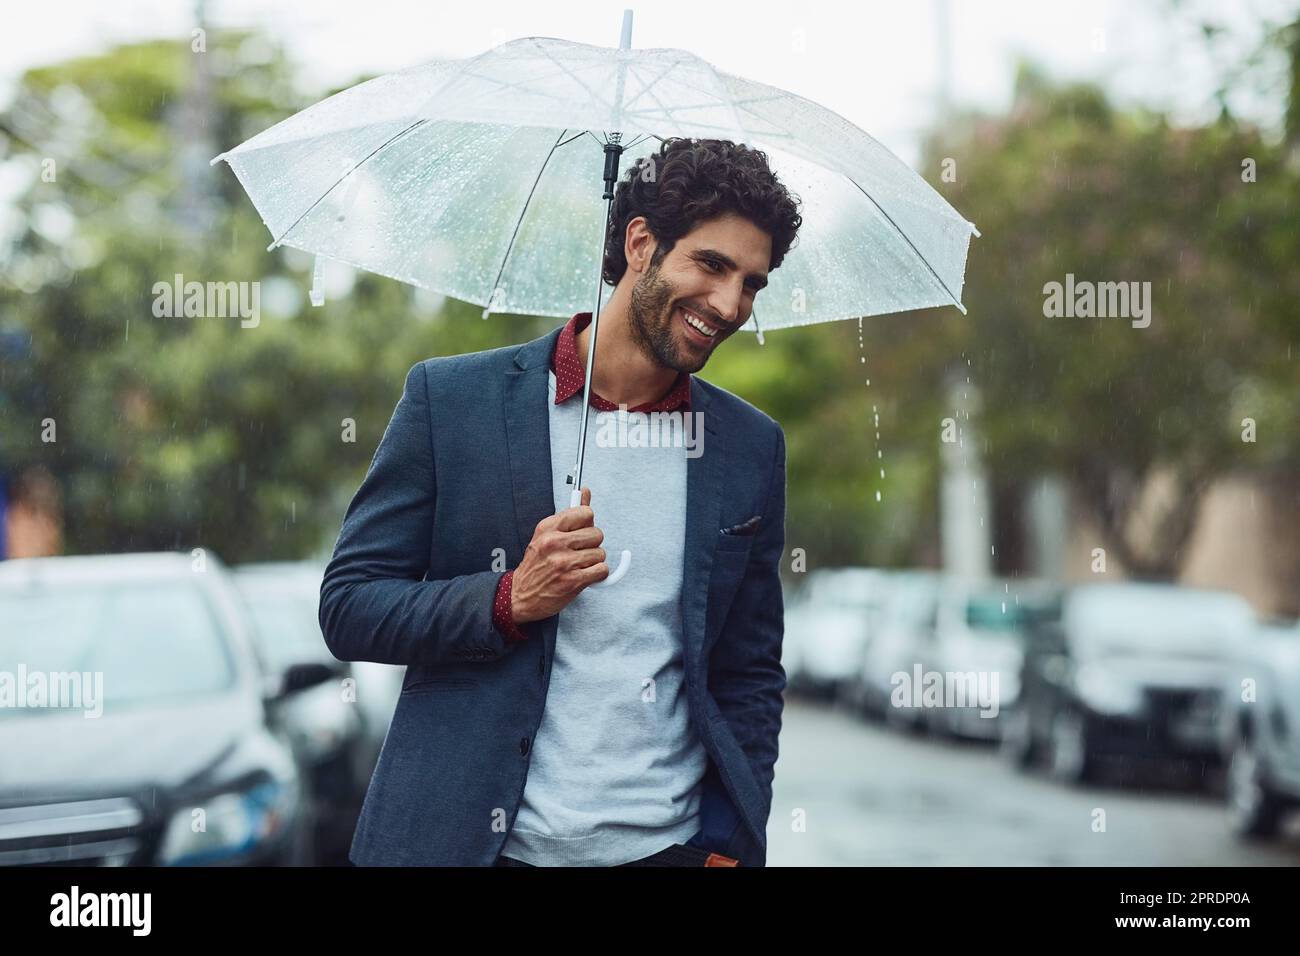 Nothing can put on damper on his good mood. a handsome young businessman on his morning commute in the rain. Stock Photo